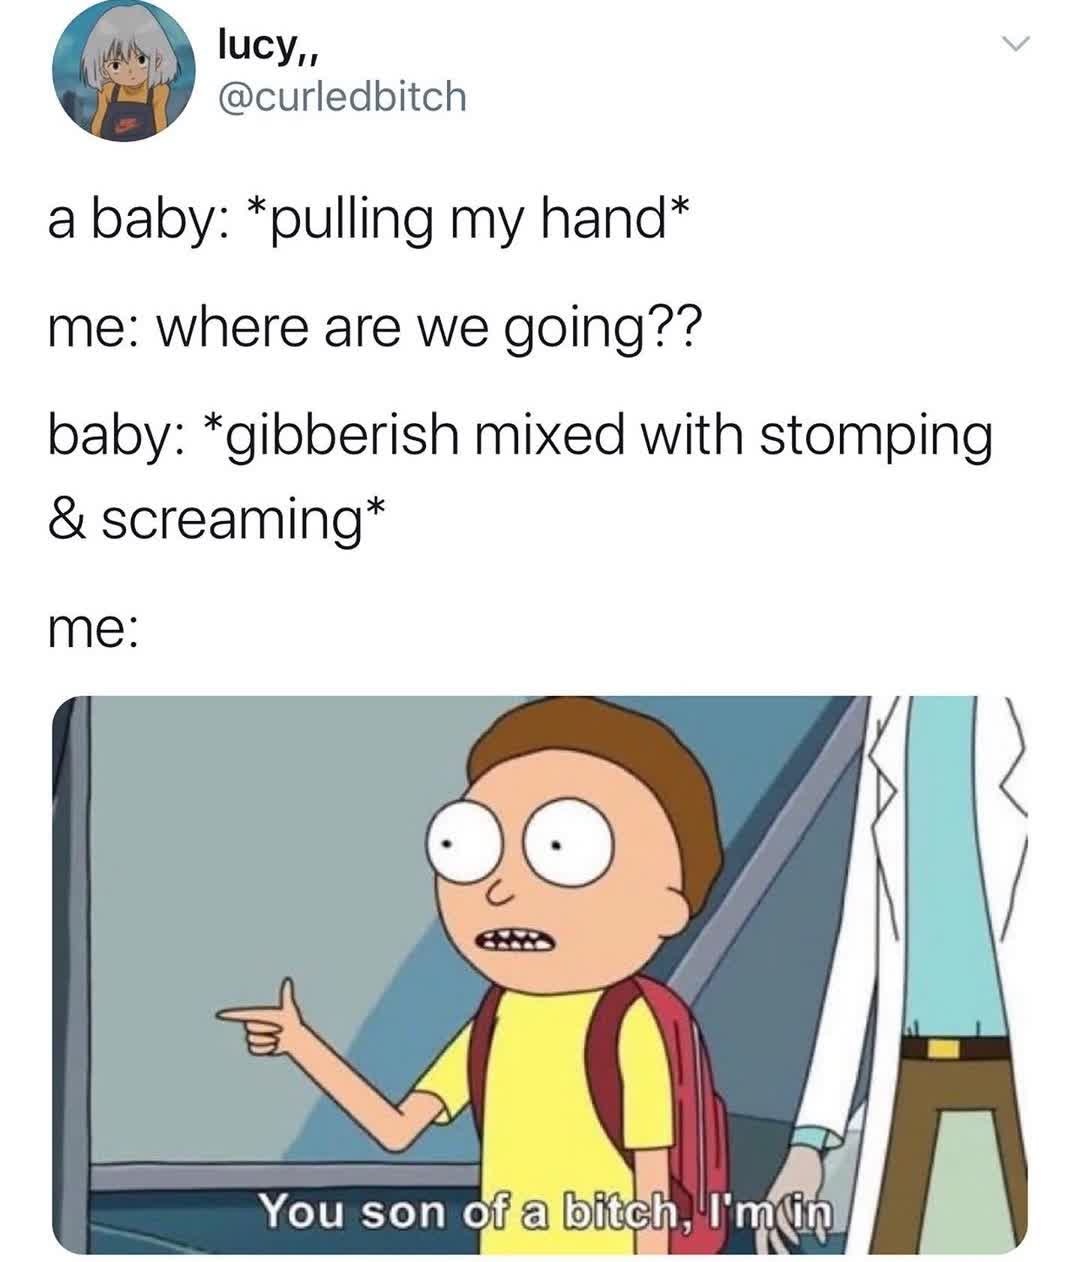 funny things to paint - lucy. a baby pulling my hand me where are we going?? baby gibberish mixed with stomping & screaming me You son of a bitch, I'm in